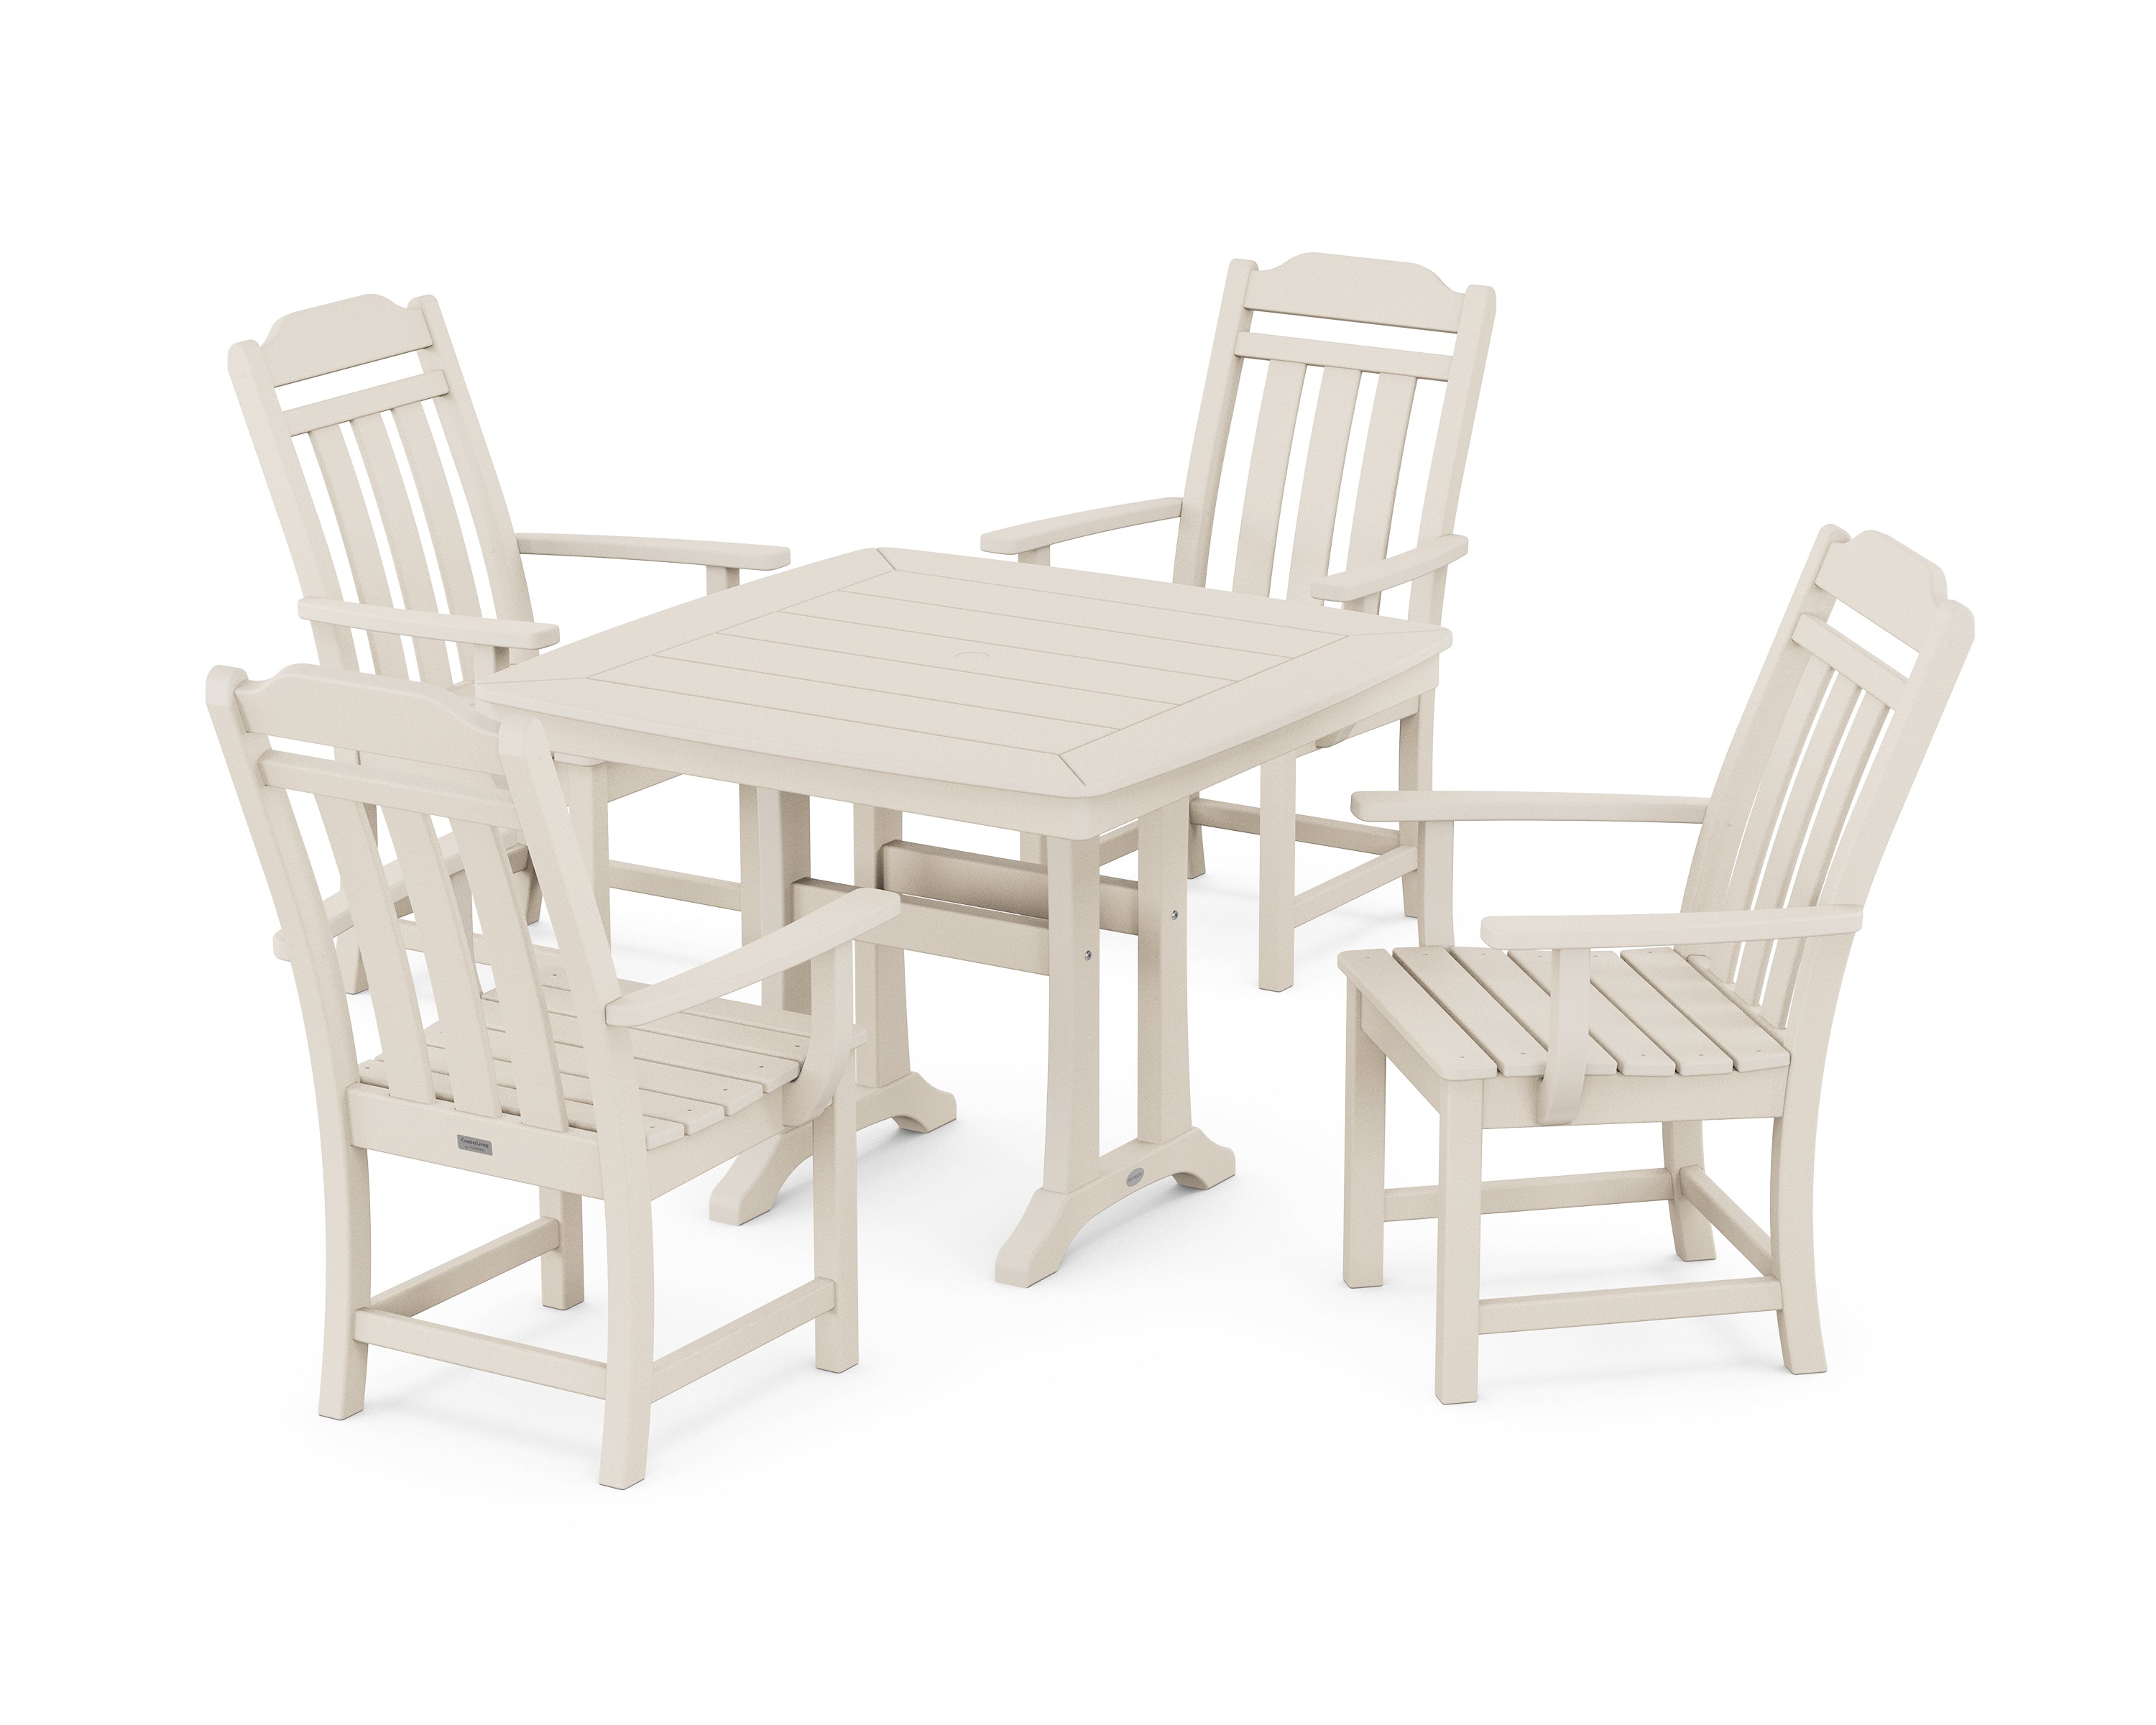 Polywood Country Living 5-Piece Dining Set with Trestle Legs in Sand